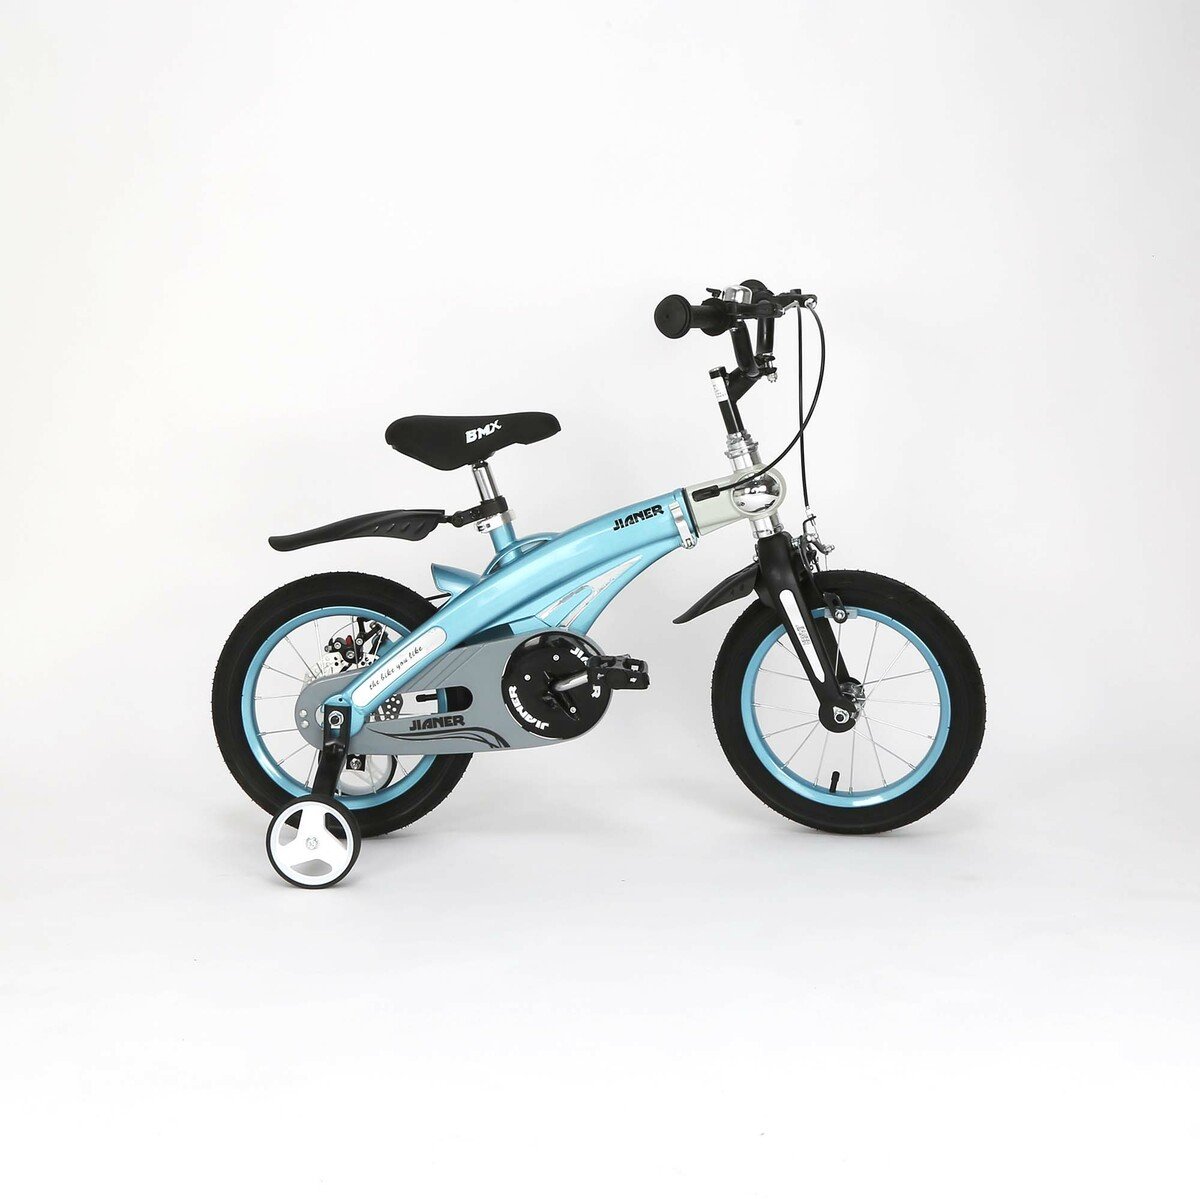 Jianer Kids Bicycle 14" WLNSF-14 Assorted Colors